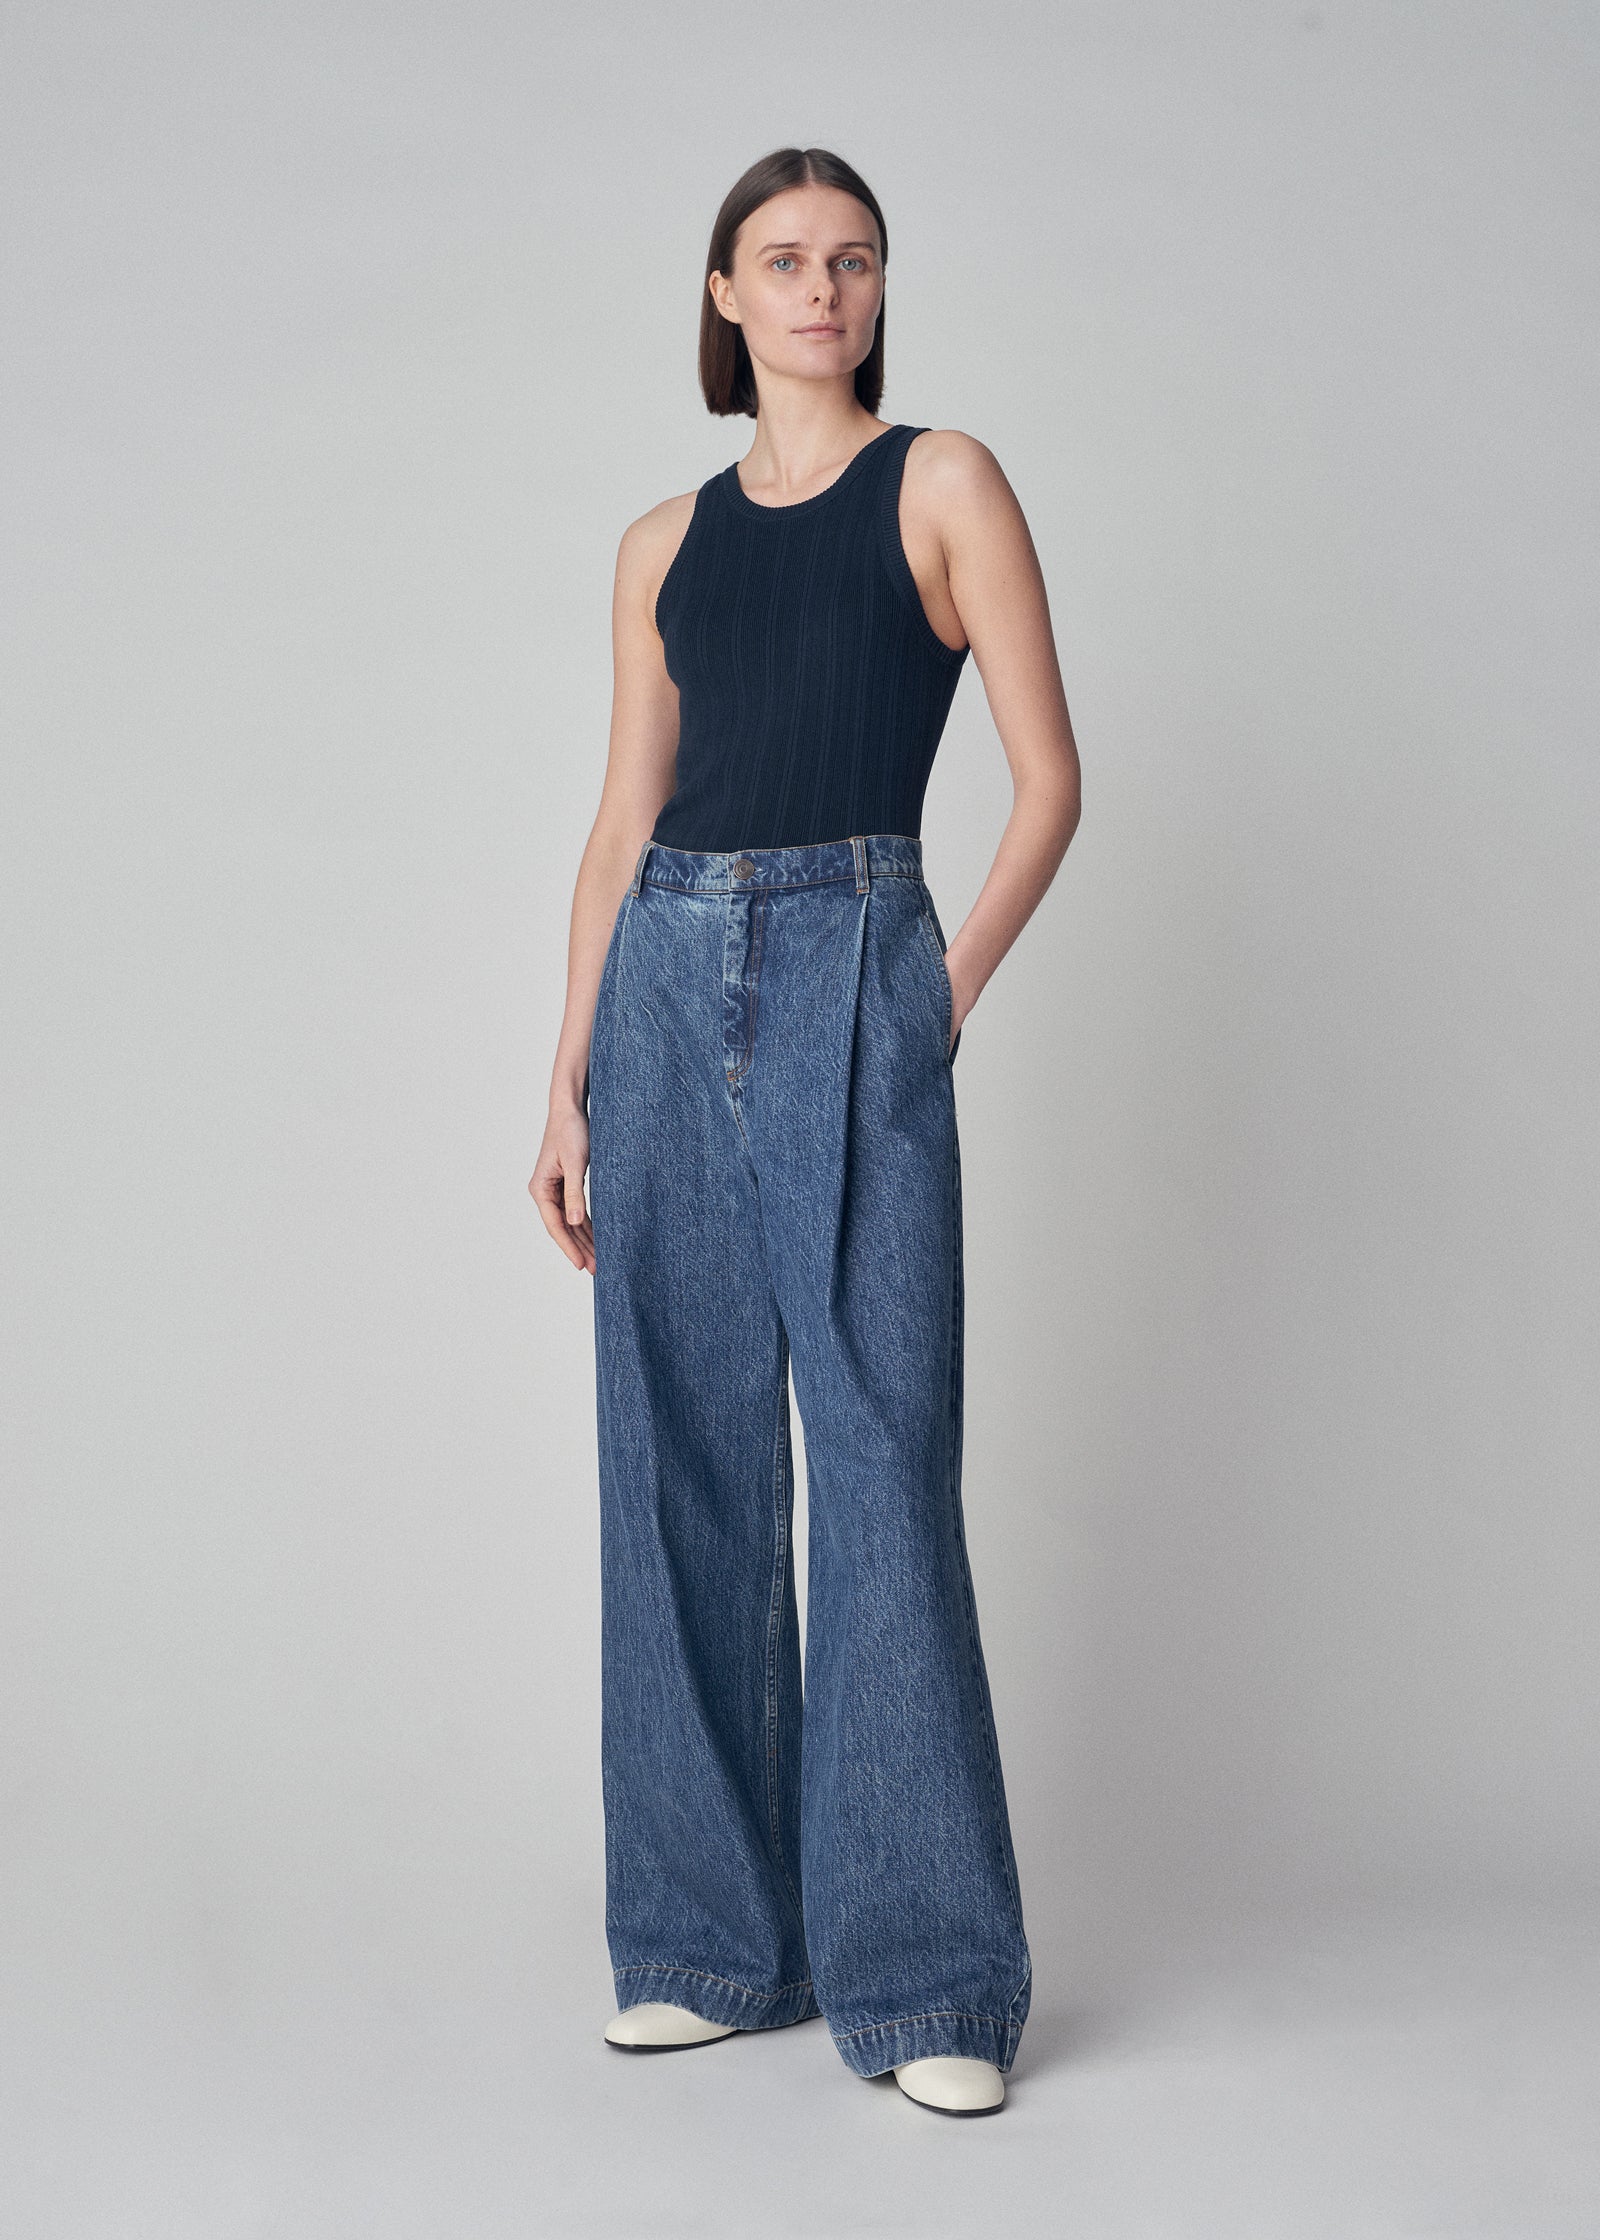 Ribbed Tank in Silk Knit  - Navy - CO Collections